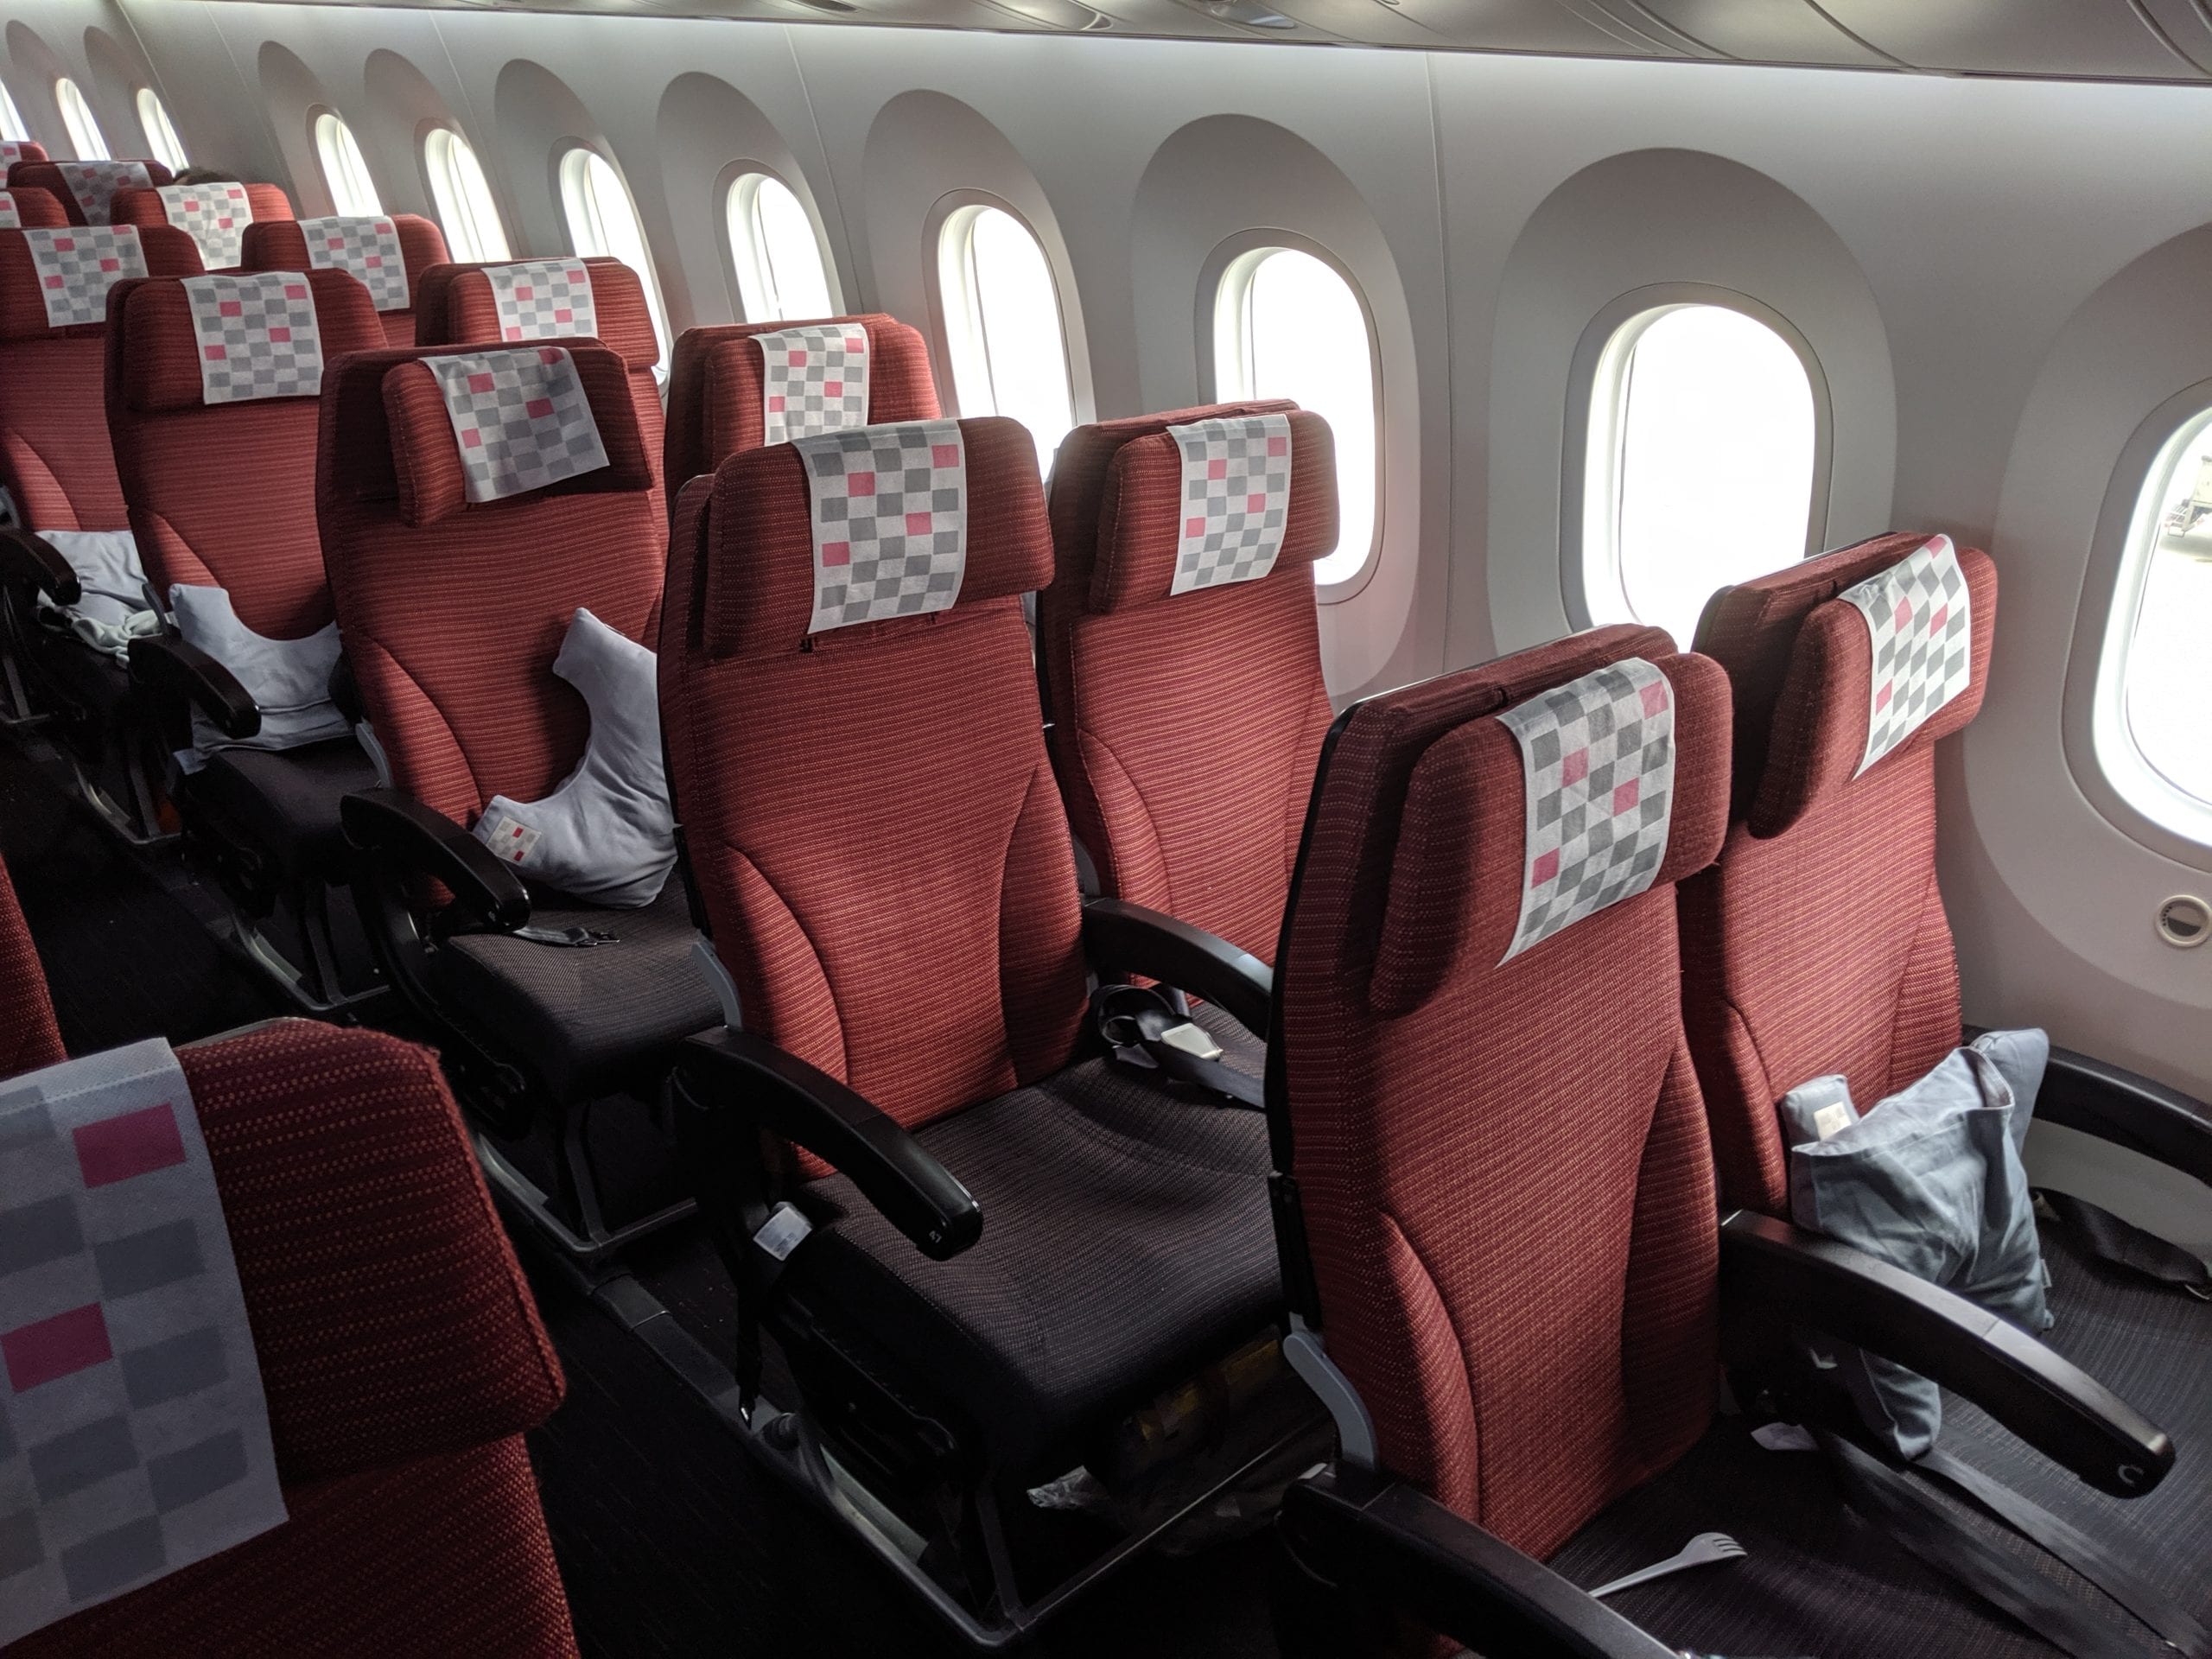 japan airlines economy seats